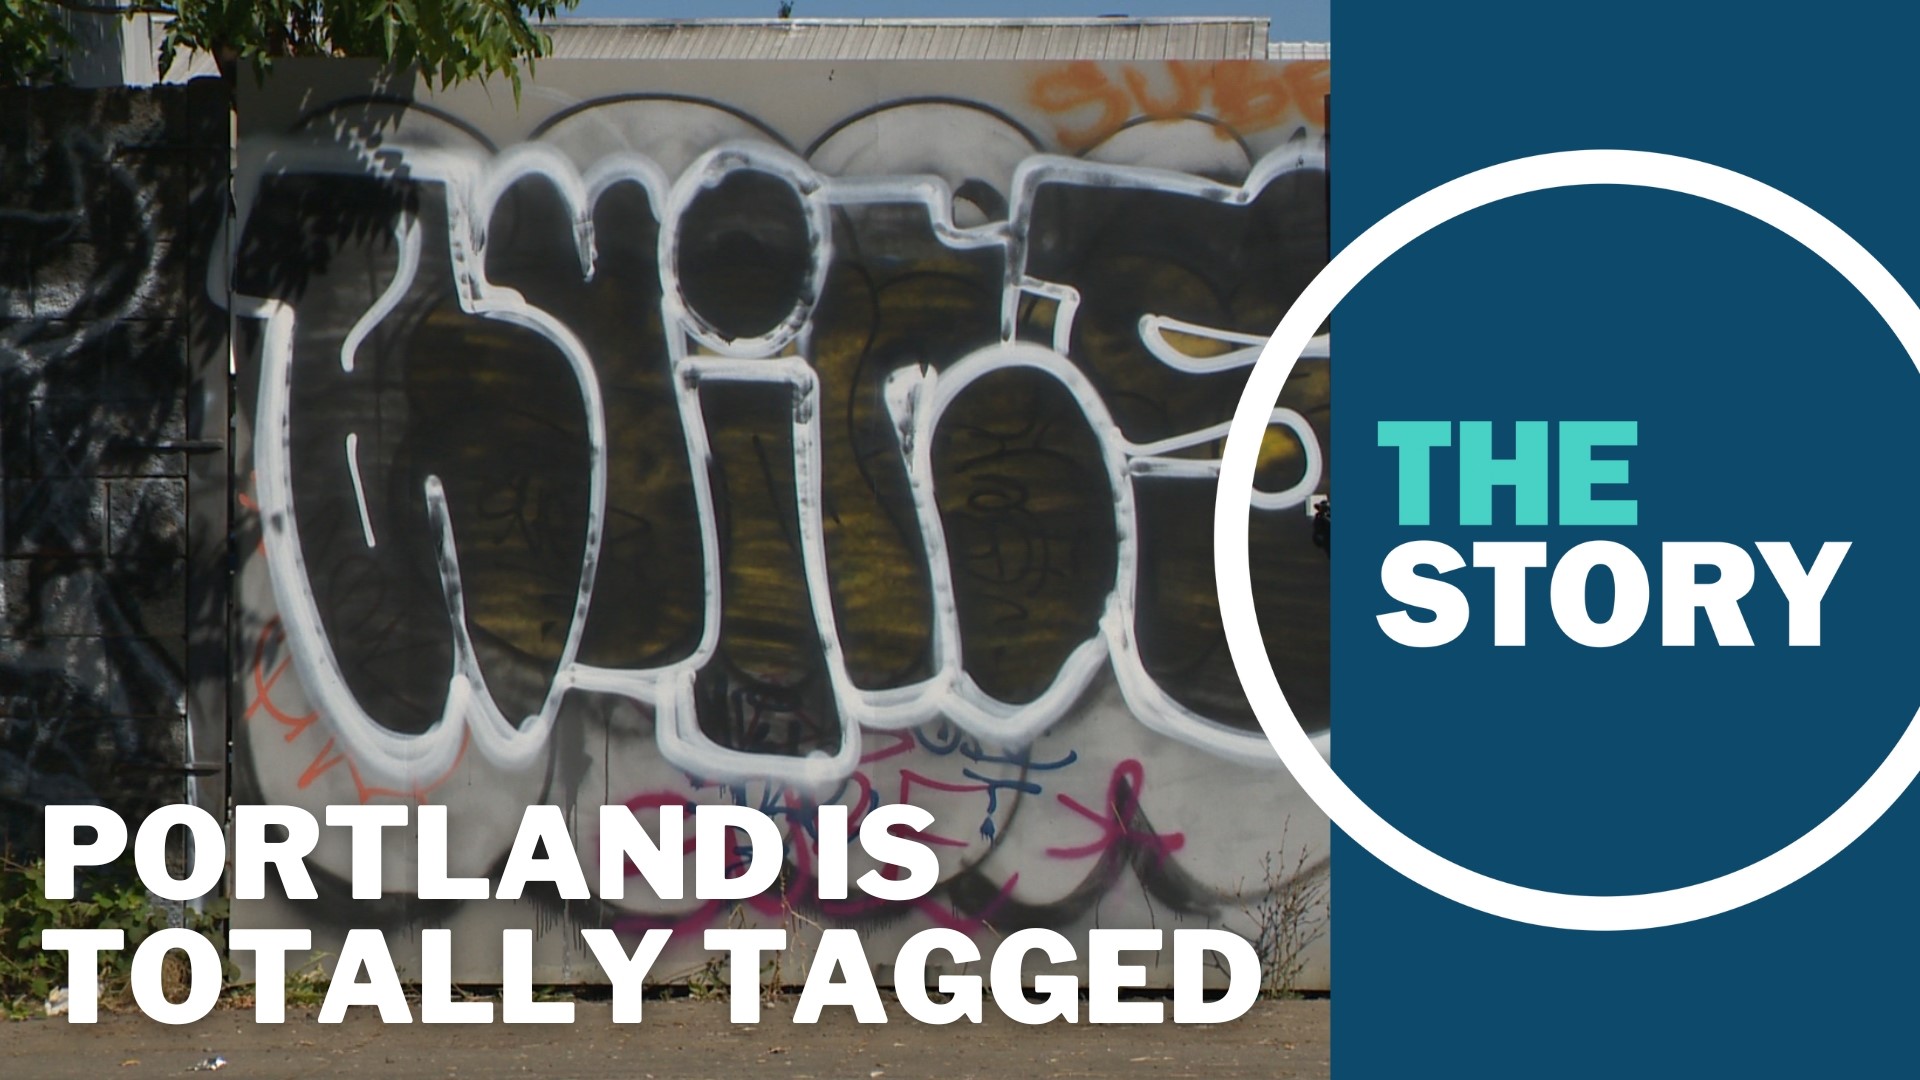 Monday morning, Portland police arrested a 22-year-old man described as a prolific tagger. The effort to clean up tags like those is costing us millions of dollars.